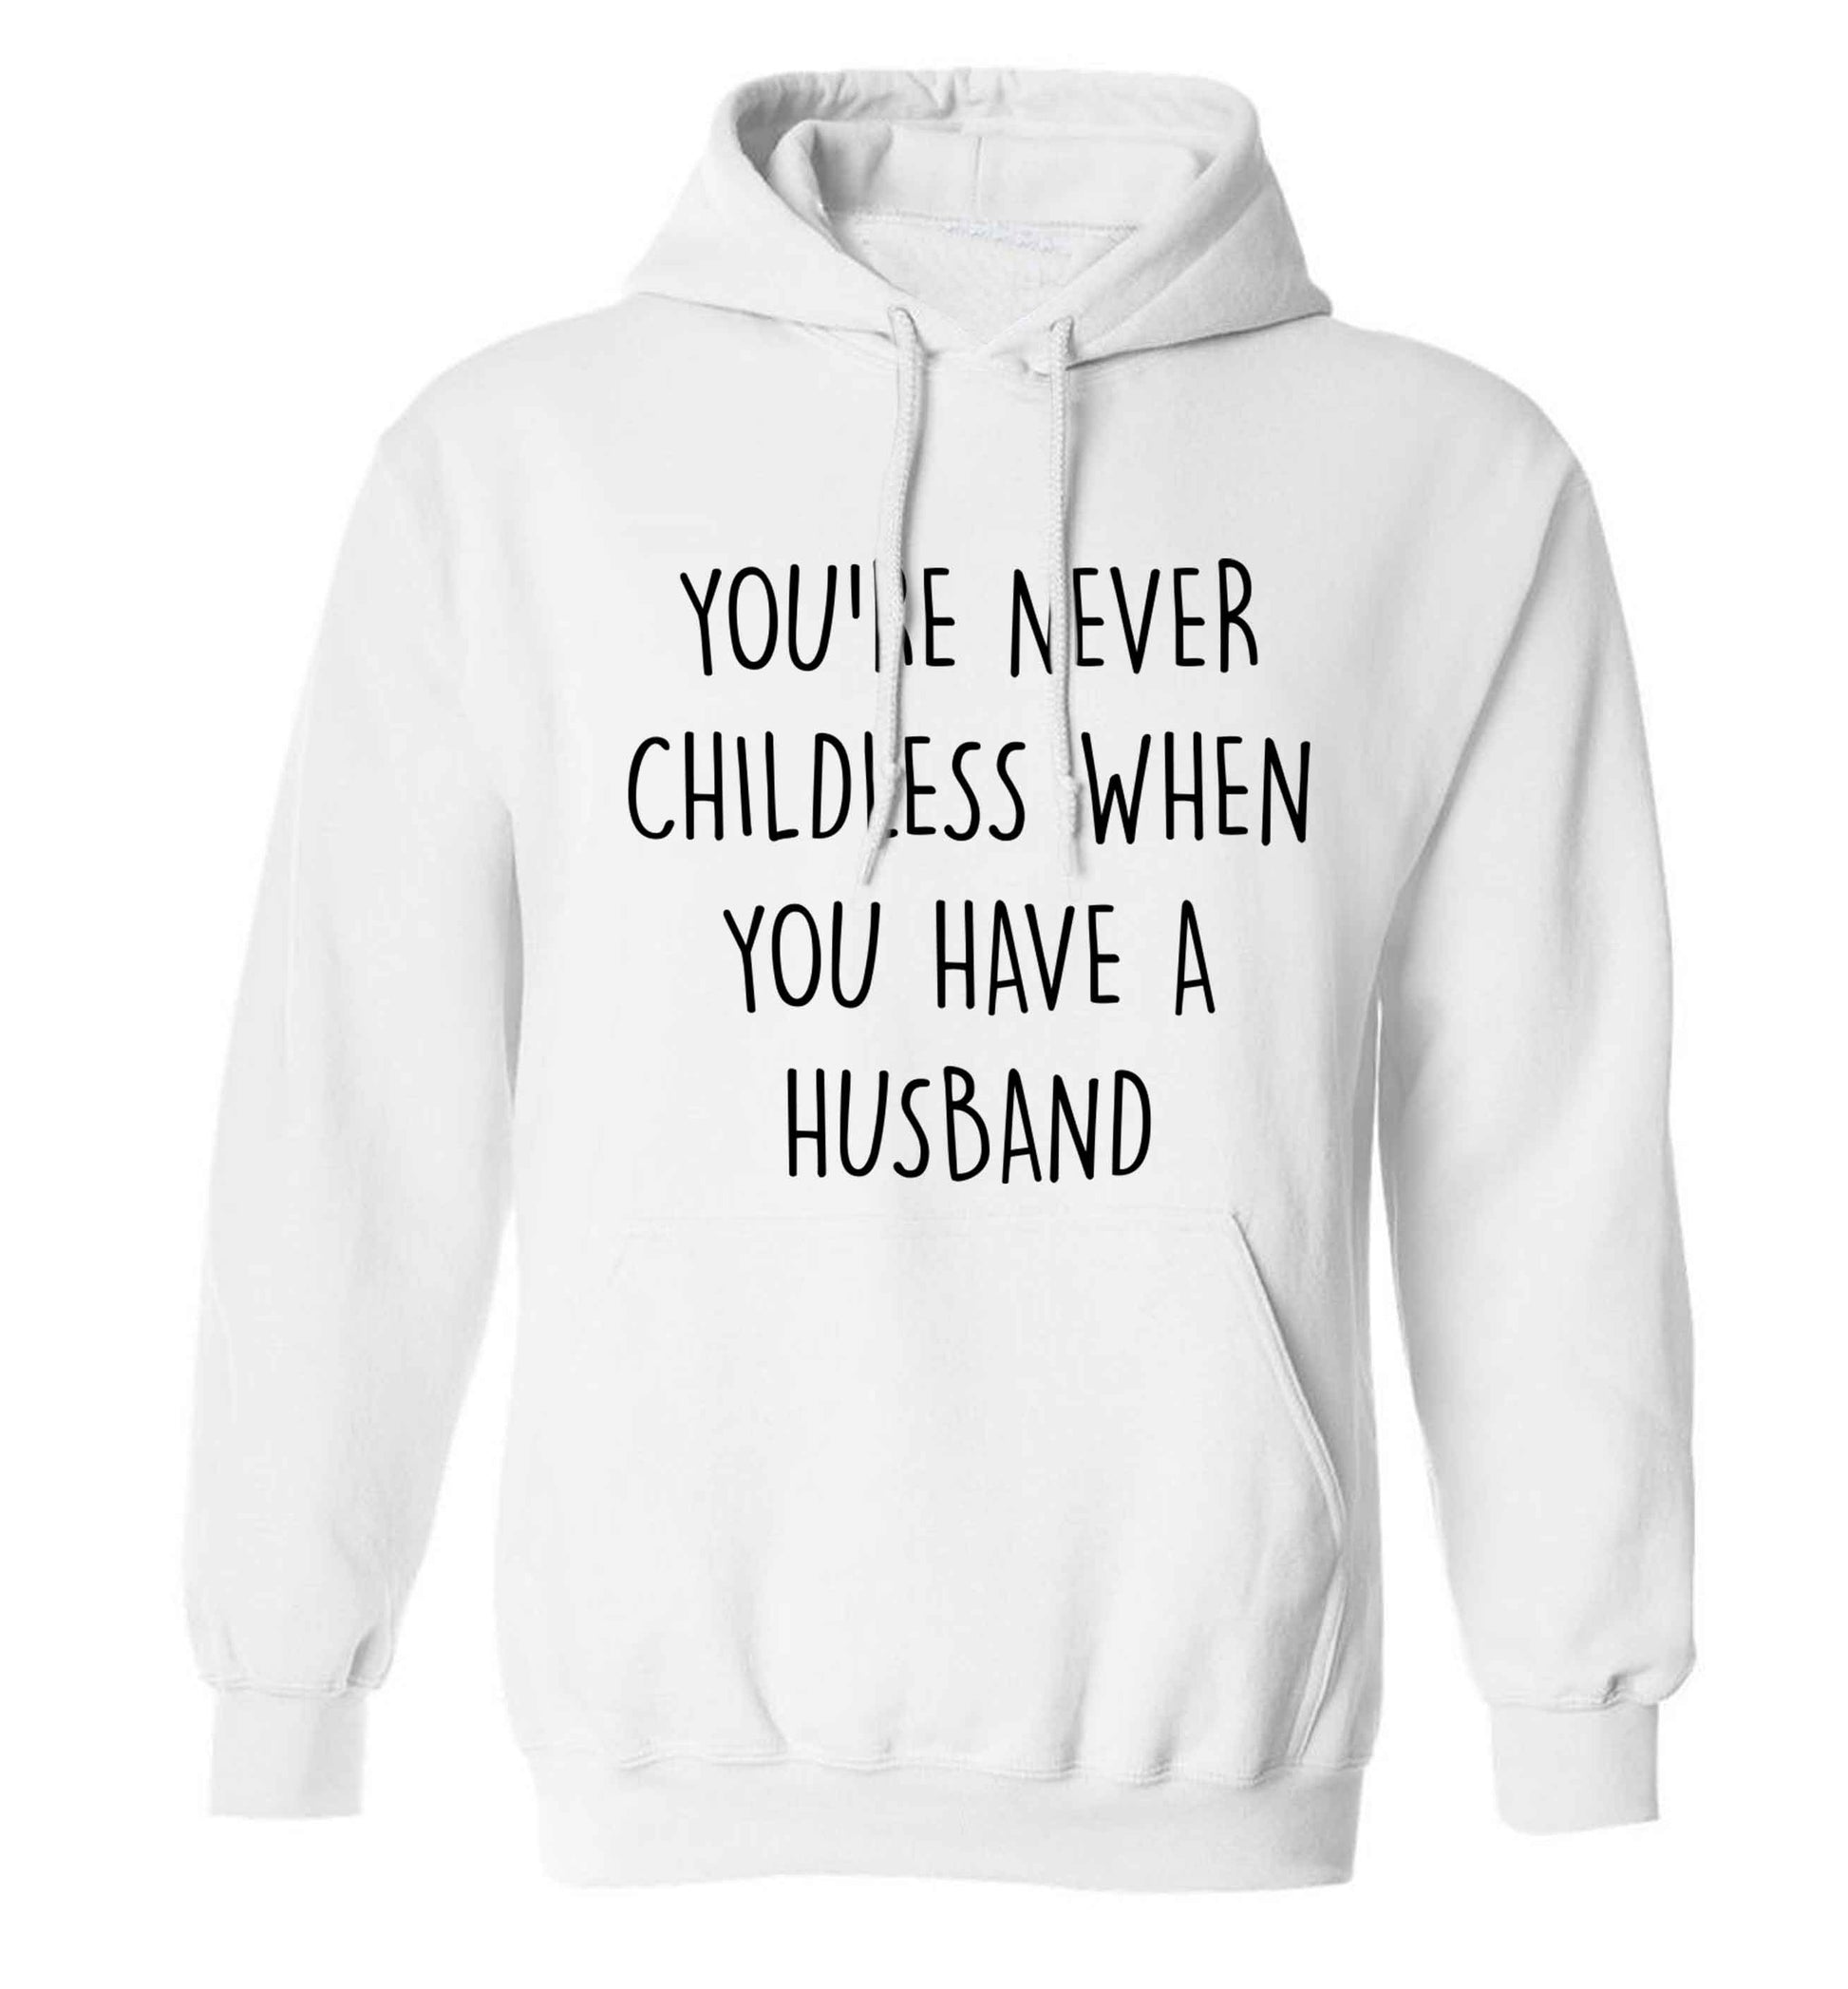 You're never childess when you have a husband adults unisex white hoodie 2XL